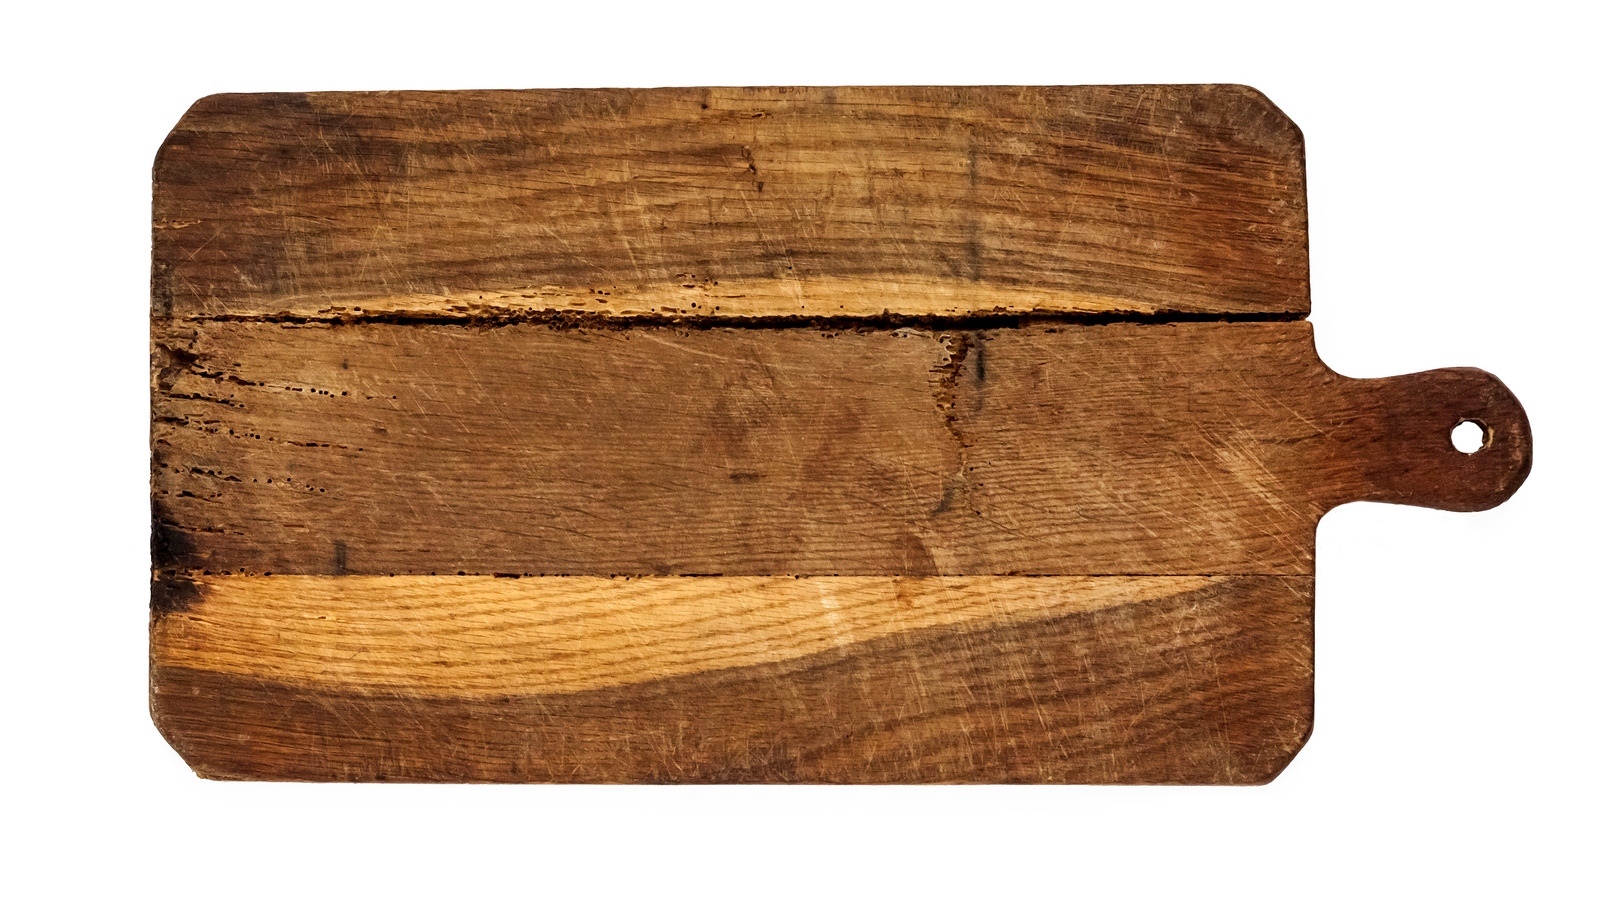 https://www.housedigest.com/img/gallery/why-you-should-stop-using-cracked-wooden-cutting-boards-immediately/l-intro-1654611120.jpg